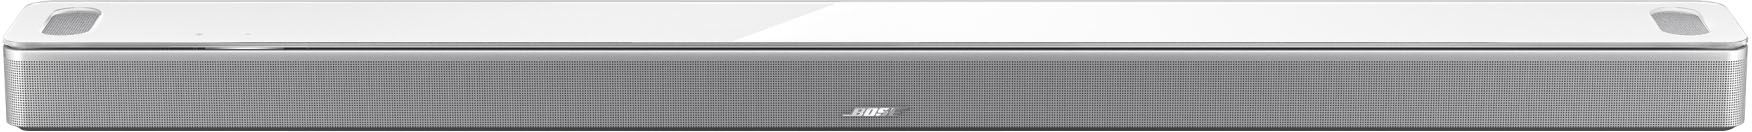 Bose Smart Ultra Soundbar with Dolby Atmos and Voice Assistant Arctic White  882963-1200 - Best Buy